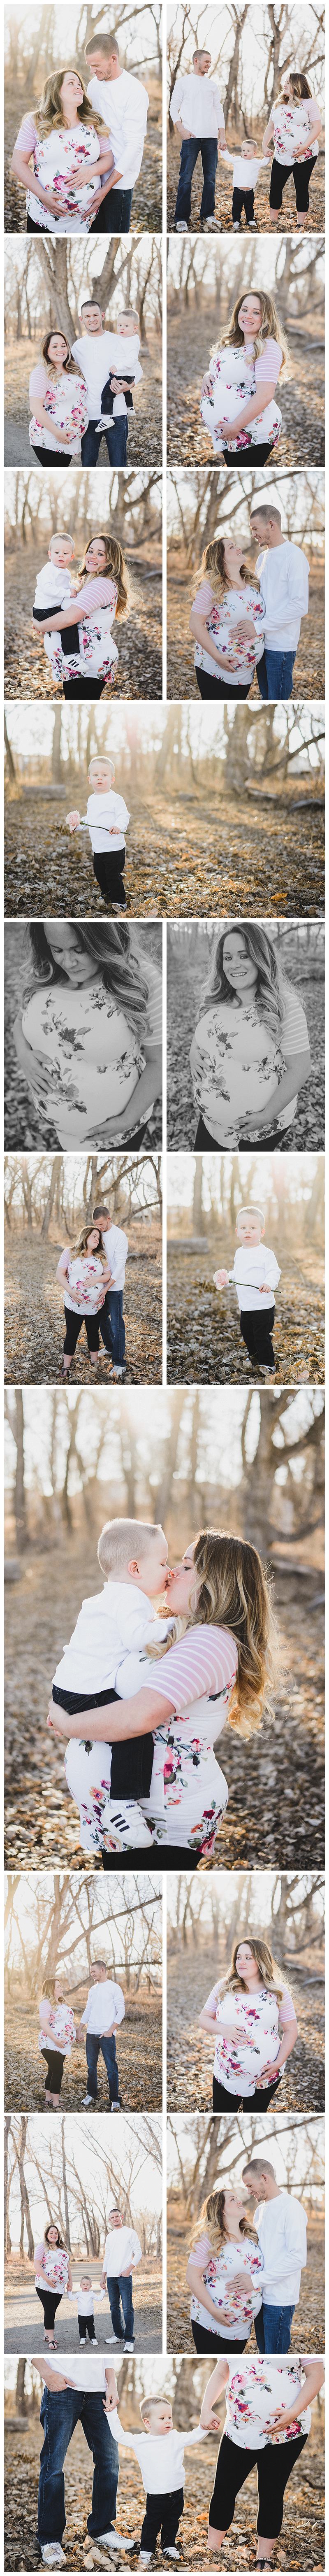 Dever-Maternity-Photography